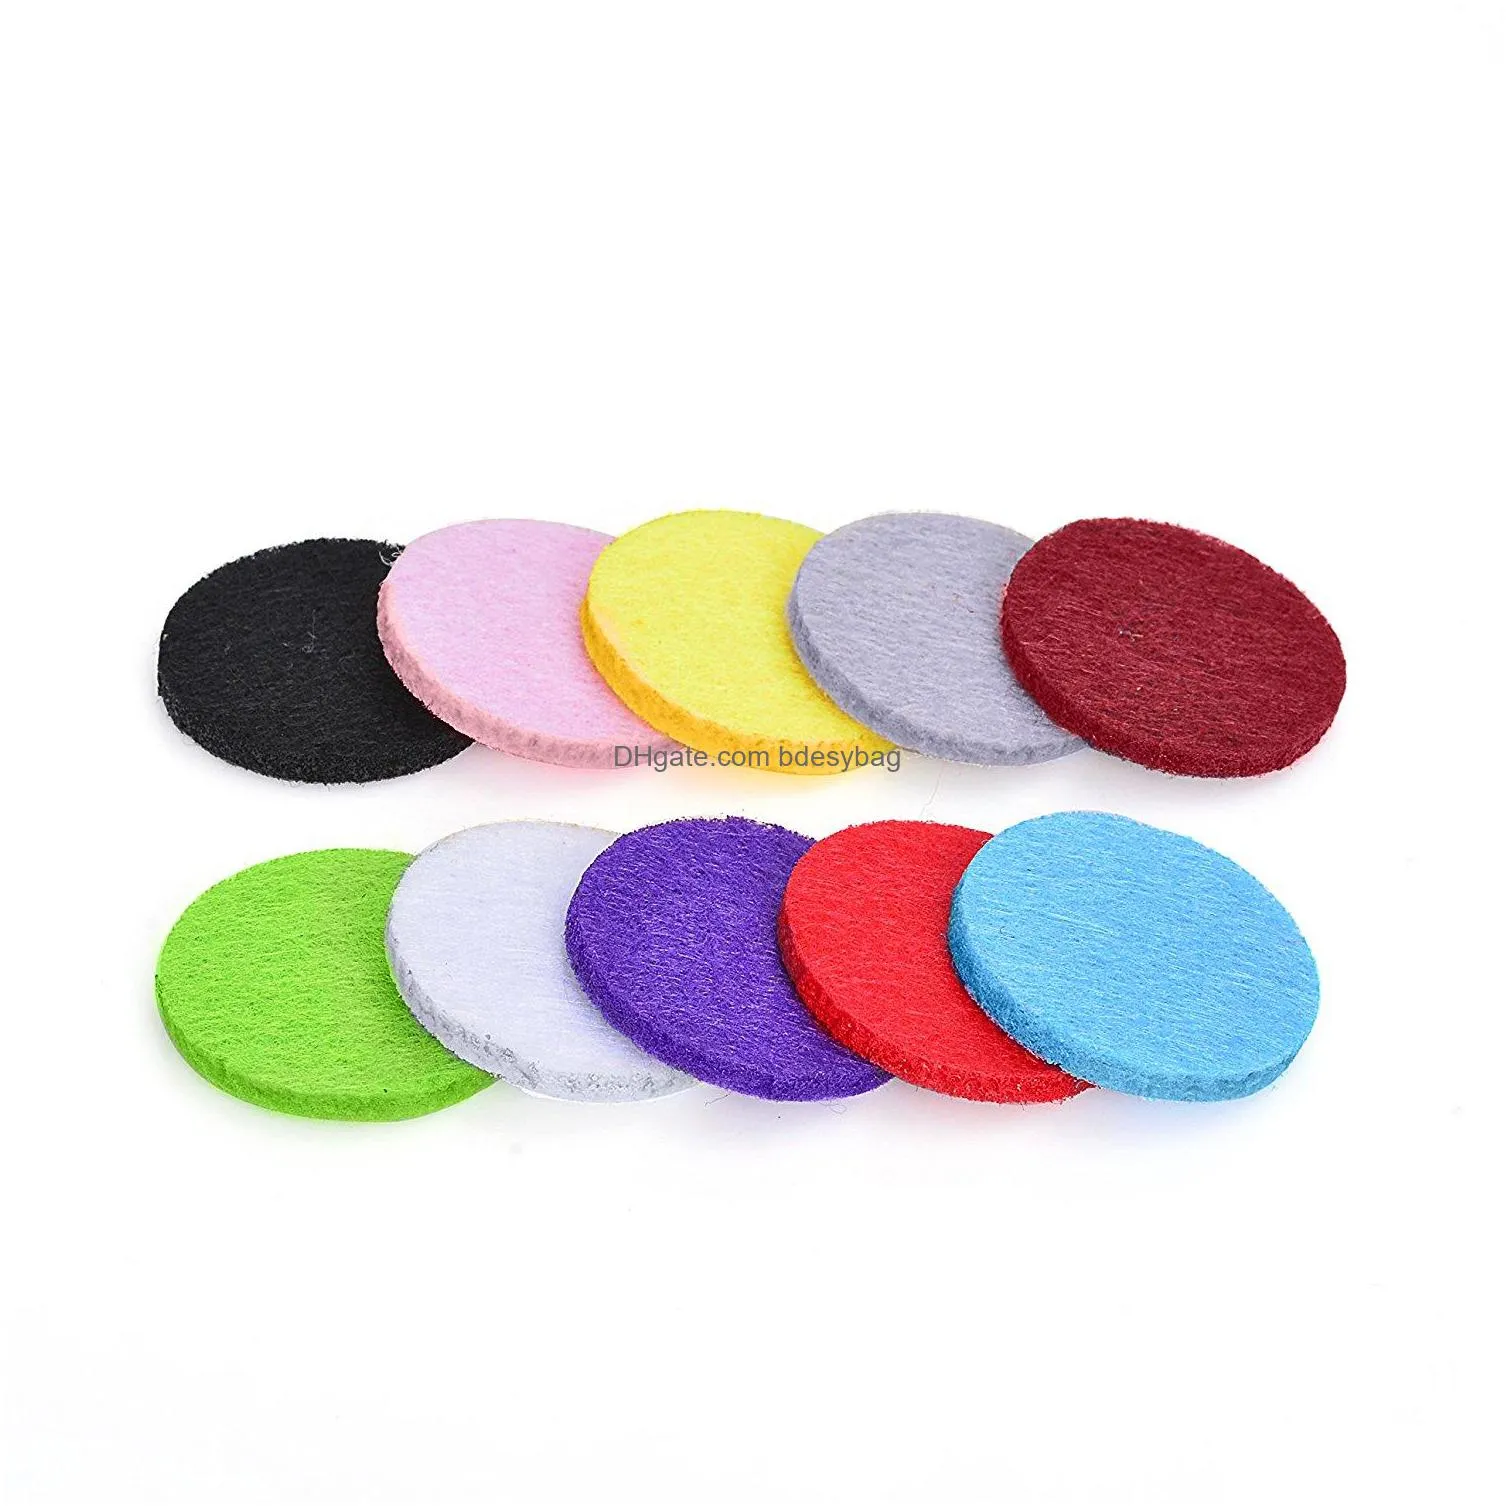 jewelry 100 pieces/bag advanced aromatherapy essential oil diffuser pendant necklace/replacement pad color mix and match